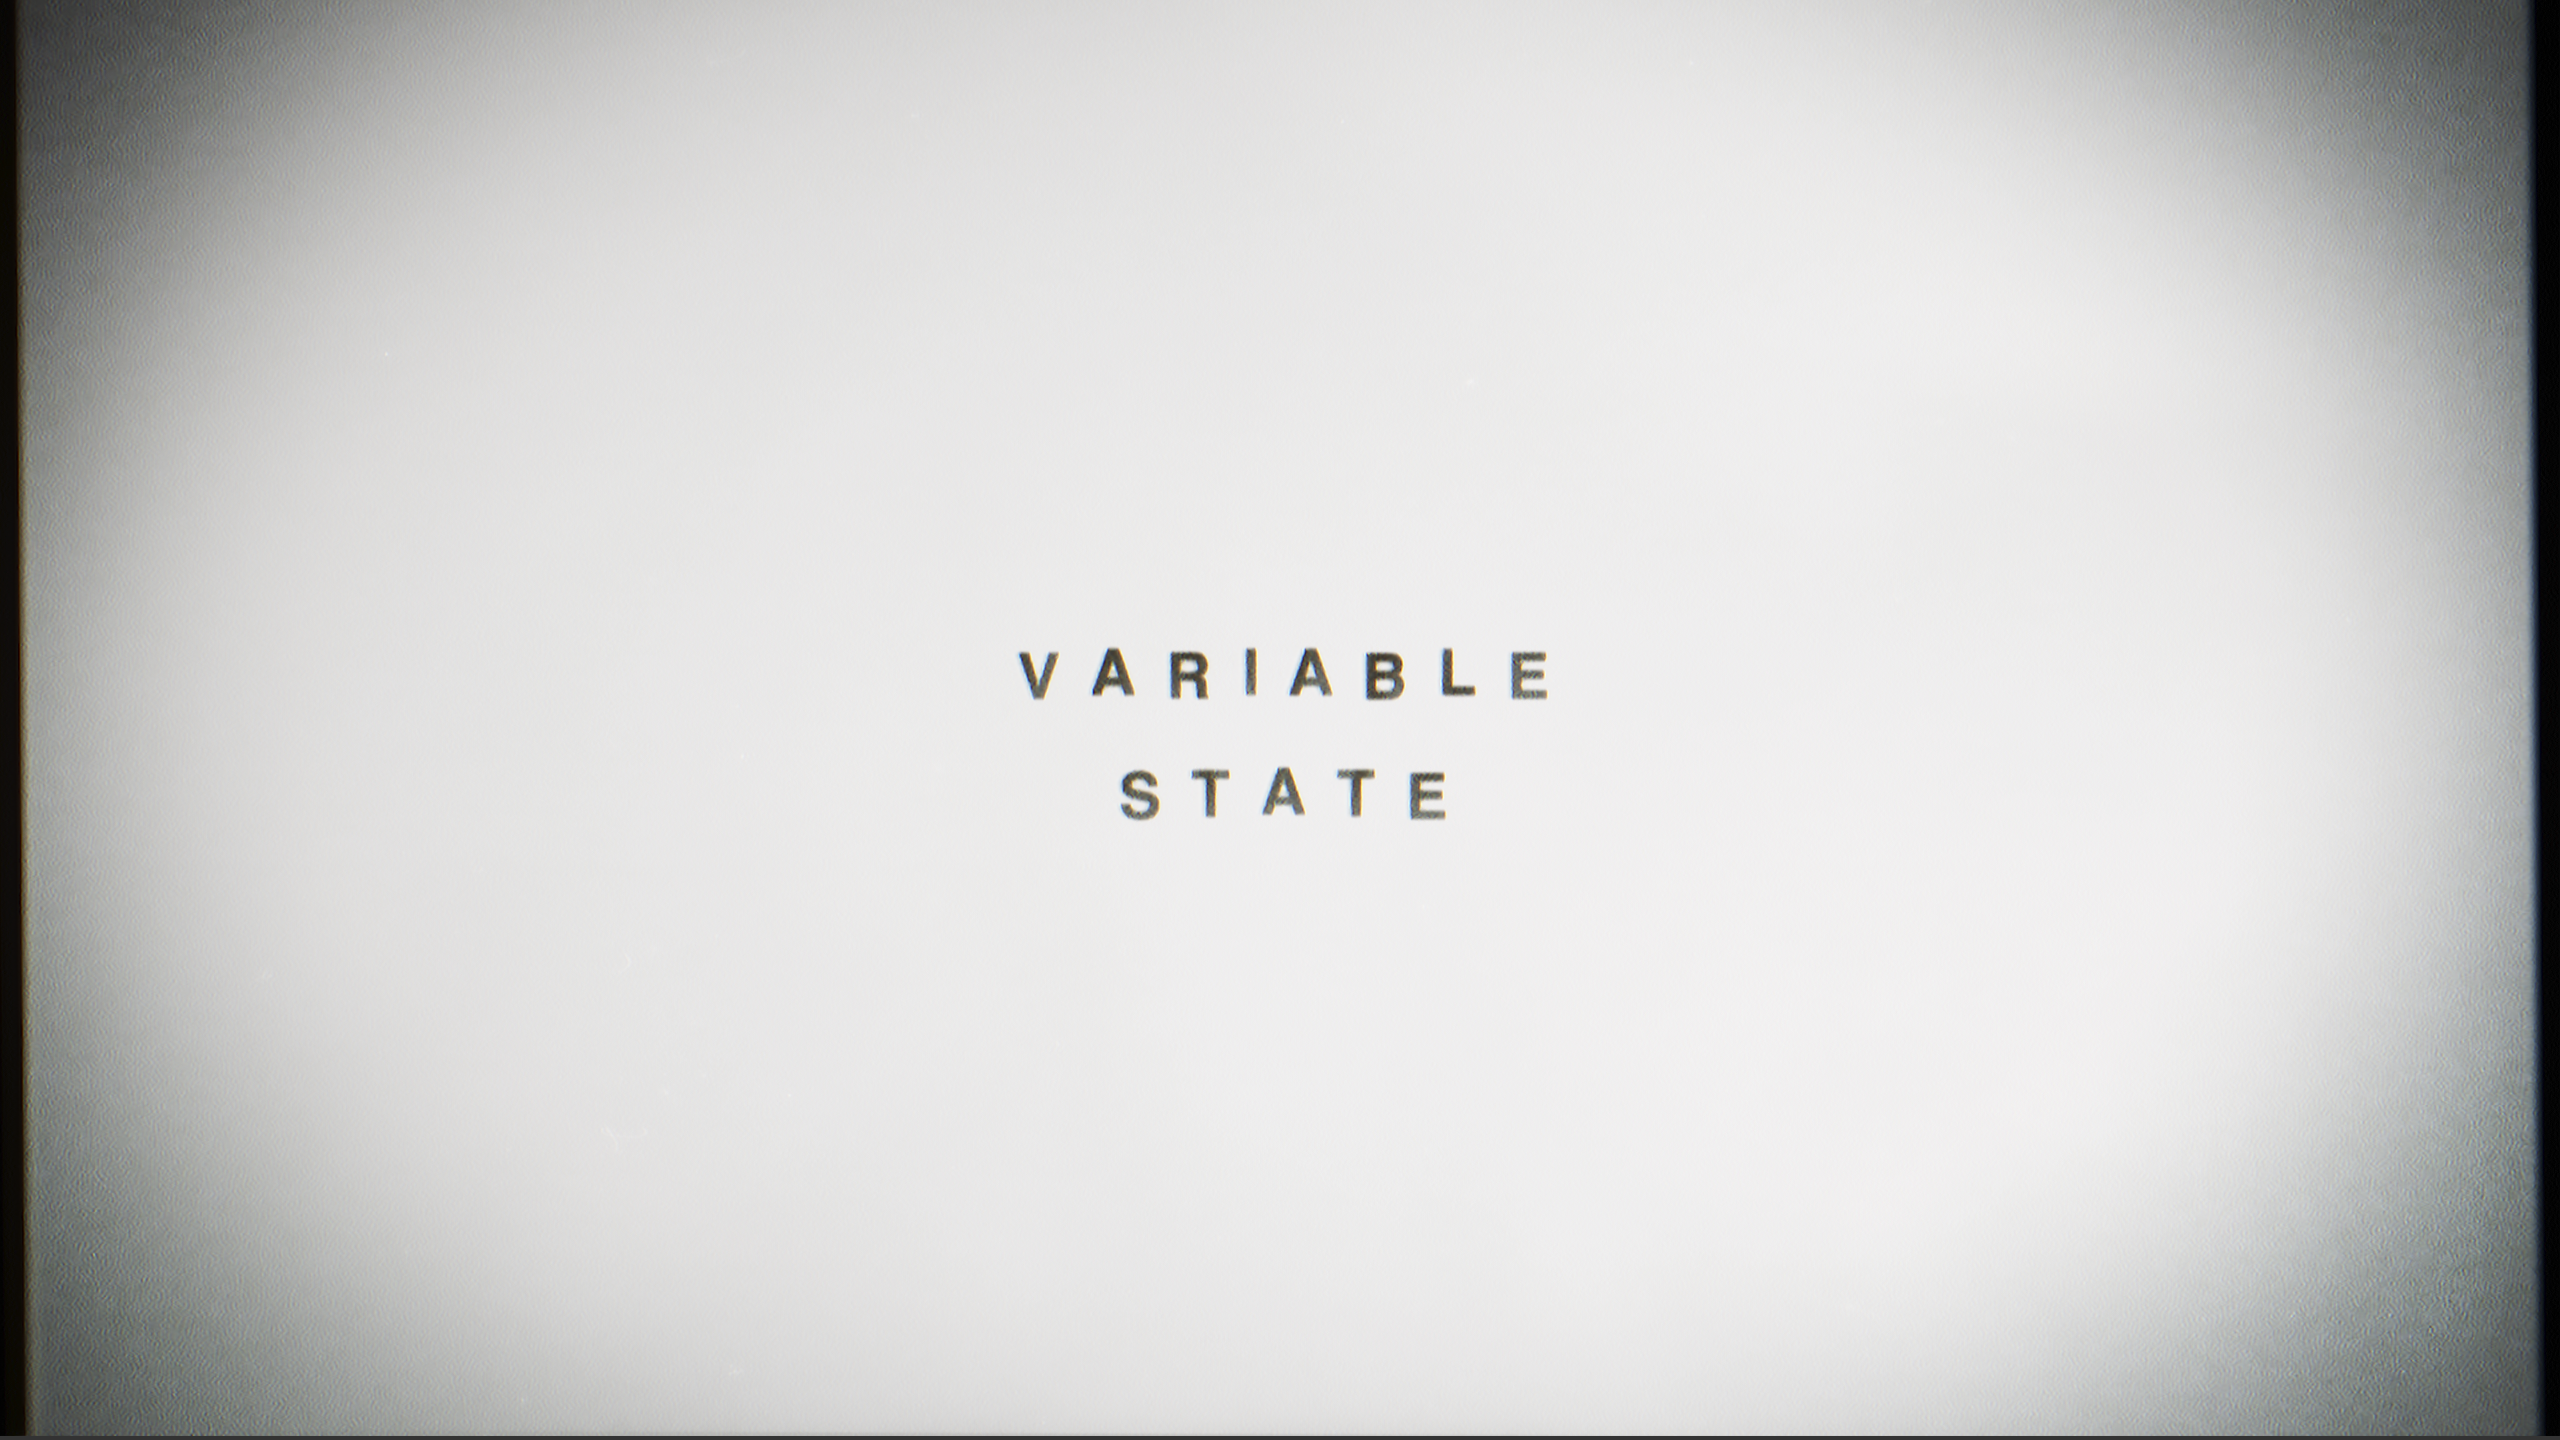 Variable State Image.png